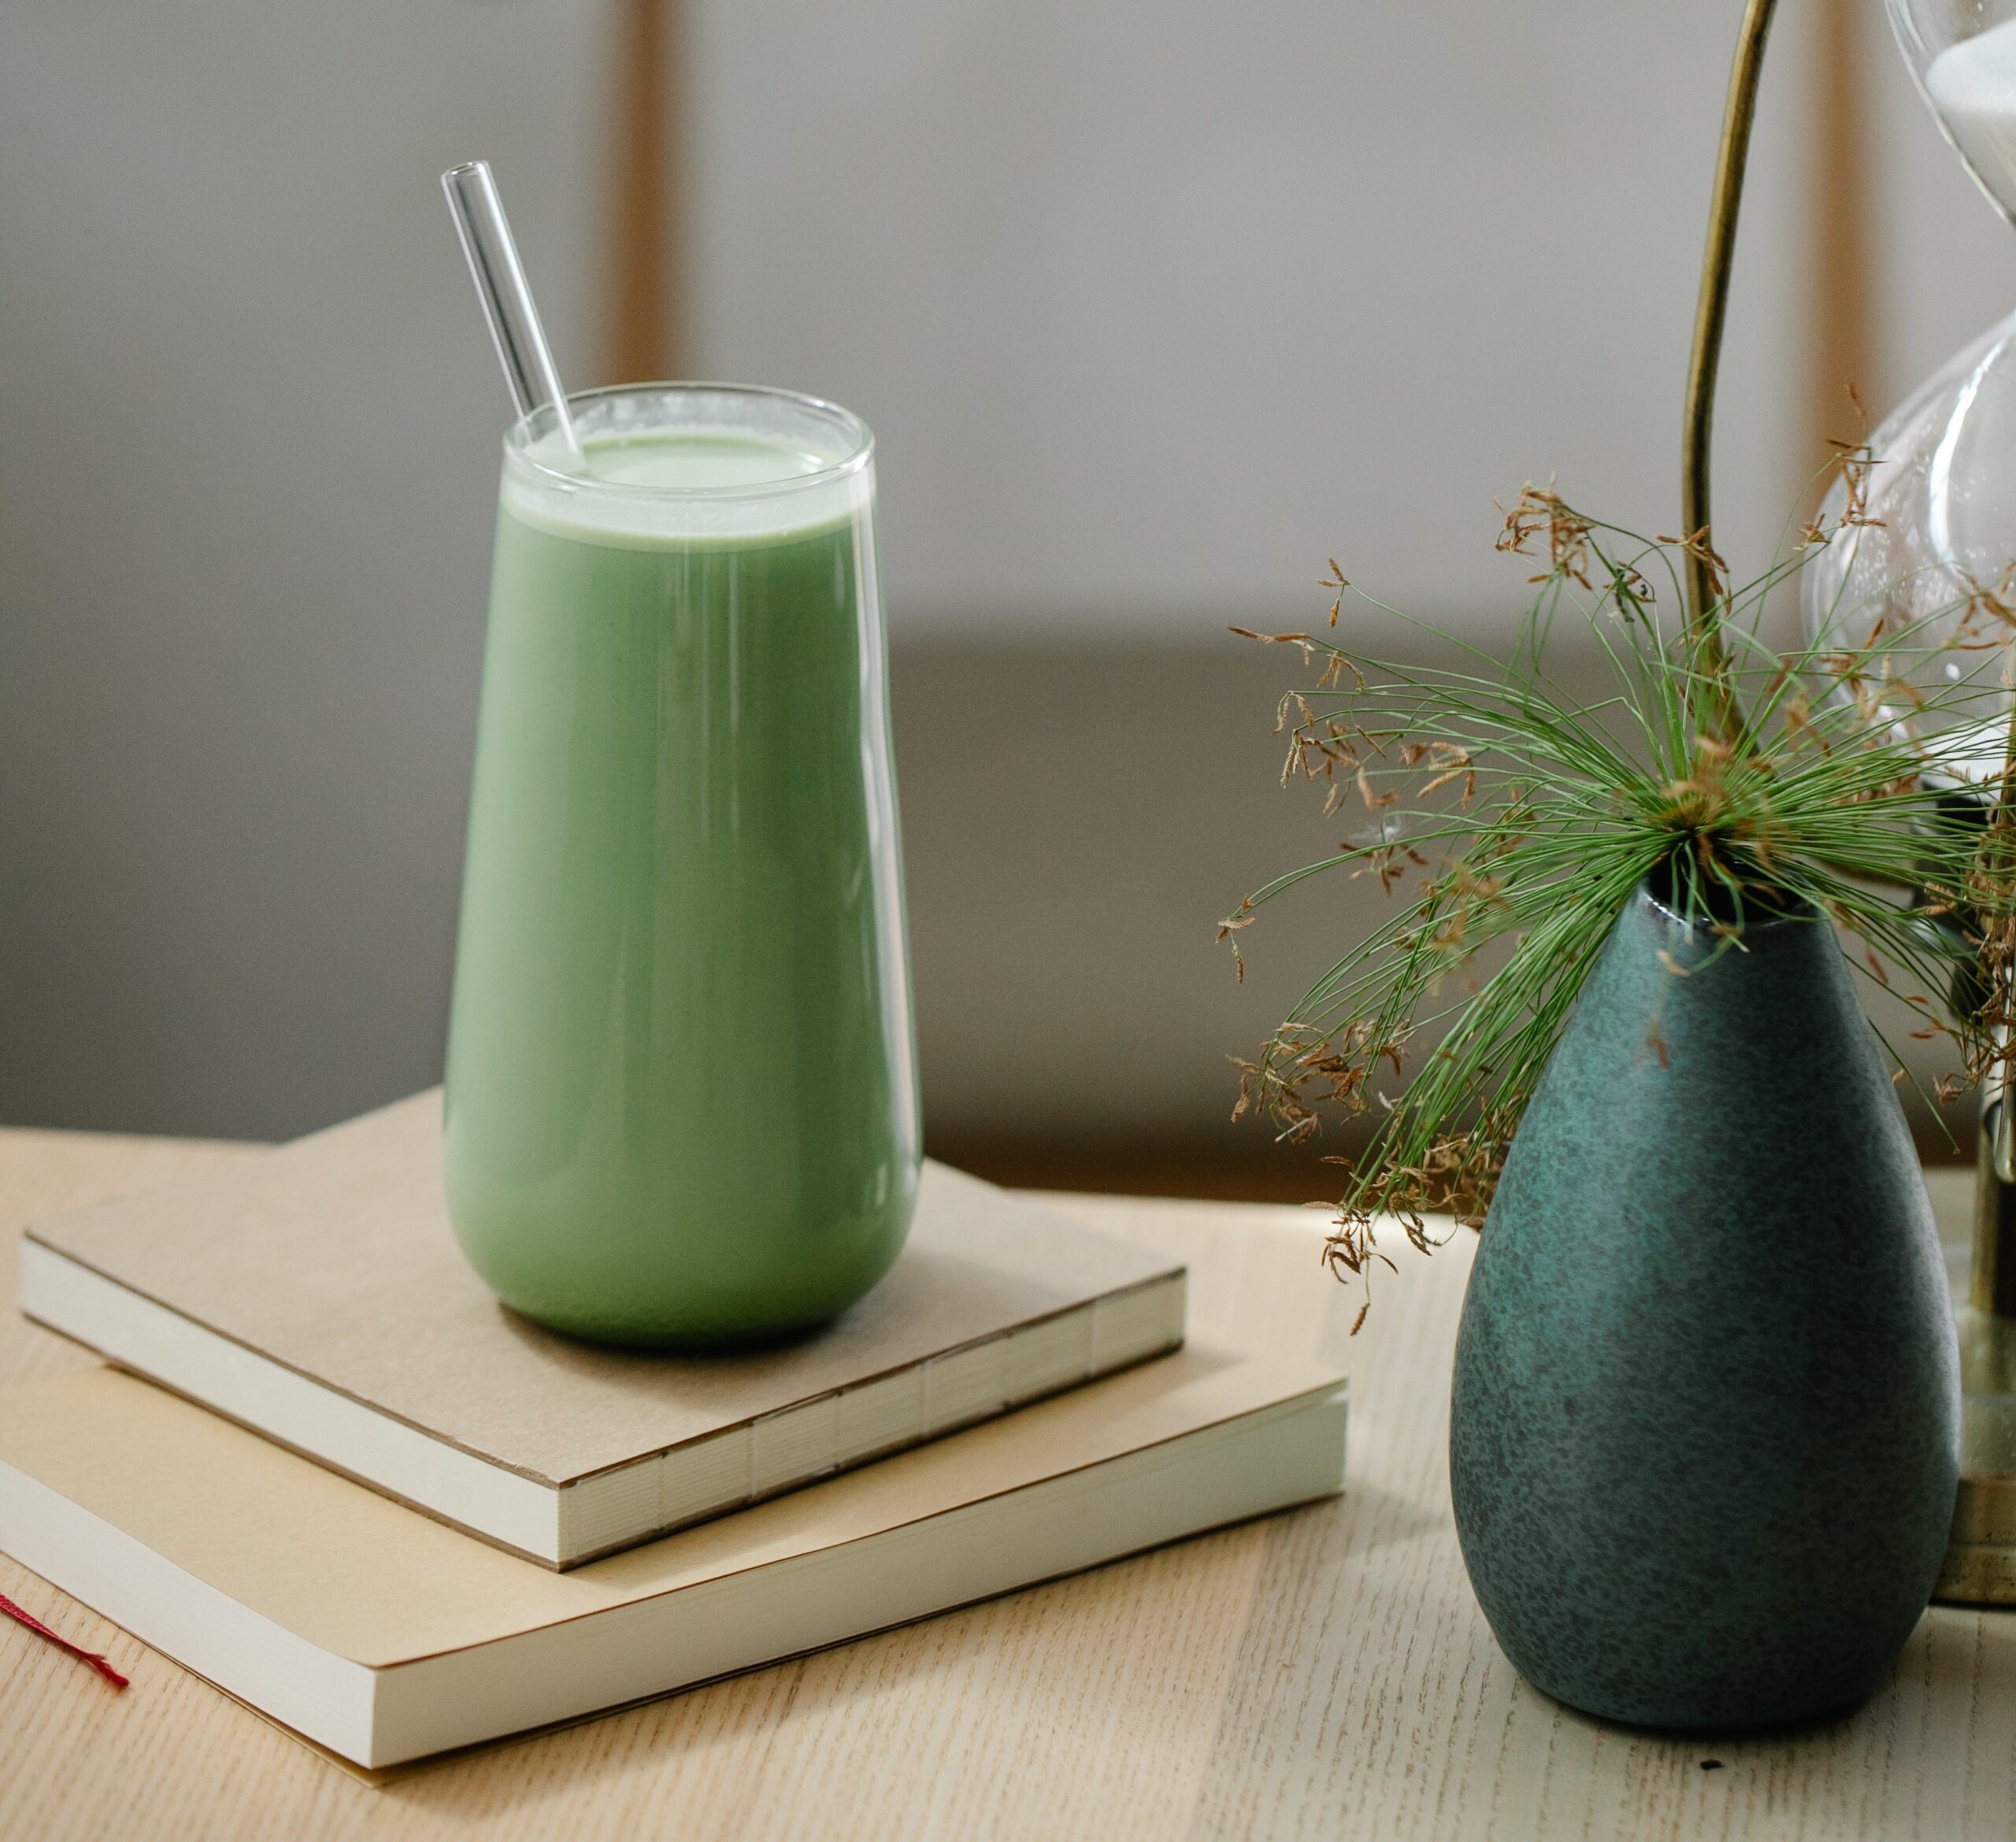 Pineapple and Kale Smoothie